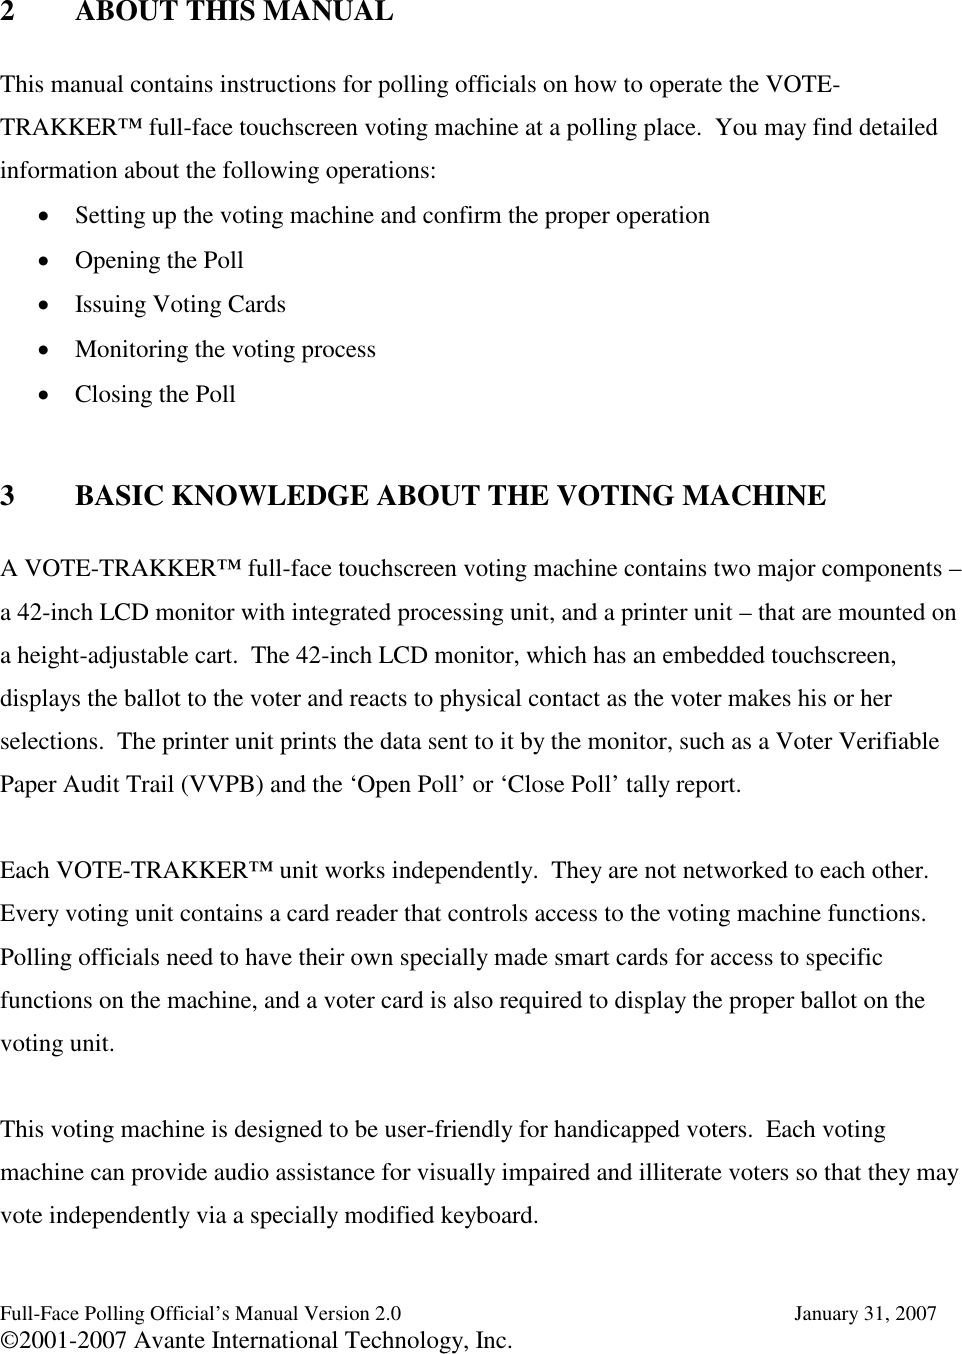 Full-Face Polling Official’s Manual Version 2.0 January 31, 2007©2001-2007 Avante International Technology, Inc.2 ABOUT THIS MANUALThis manual contains instructions for polling officials on how to operate the VOTE-TRAKKER™full-face touchscreen voting machine at a polling place. You may find detailedinformation about the following operations: Setting up the voting machine and confirm the proper operation Opening the Poll Issuing Voting Cards Monitoring the voting process Closing the Poll3 BASIC KNOWLEDGE ABOUT THE VOTING MACHINEA VOTE-TRAKKER™full-face touchscreen voting machine contains two major components –a 42-inch LCD monitor with integrated processing unit, and a printer unit – that are mounted ona height-adjustable cart. The 42-inch LCD monitor, which has an embedded touchscreen,displays the ballot to the voter and reacts to physical contact as the voter makes his or herselections. The printer unit prints the data sent to it by the monitor, such as a Voter VerifiablePaper Audit Trail (VVPB) and the ‘Open Poll’ or ‘Close Poll’ tally report.Each VOTE-TRAKKER™unit works independently. They are not networked to each other.Every voting unit contains a card reader that controls access to the voting machine functions.Polling officials need to have their own specially made smart cards for access to specificfunctions on the machine, and a voter card is also required to display the proper ballot on thevoting unit.This voting machine is designed to be user-friendly for handicapped voters. Each votingmachine can provide audio assistance for visually impaired and illiterate voters so that they mayvote independently via a specially modified keyboard.